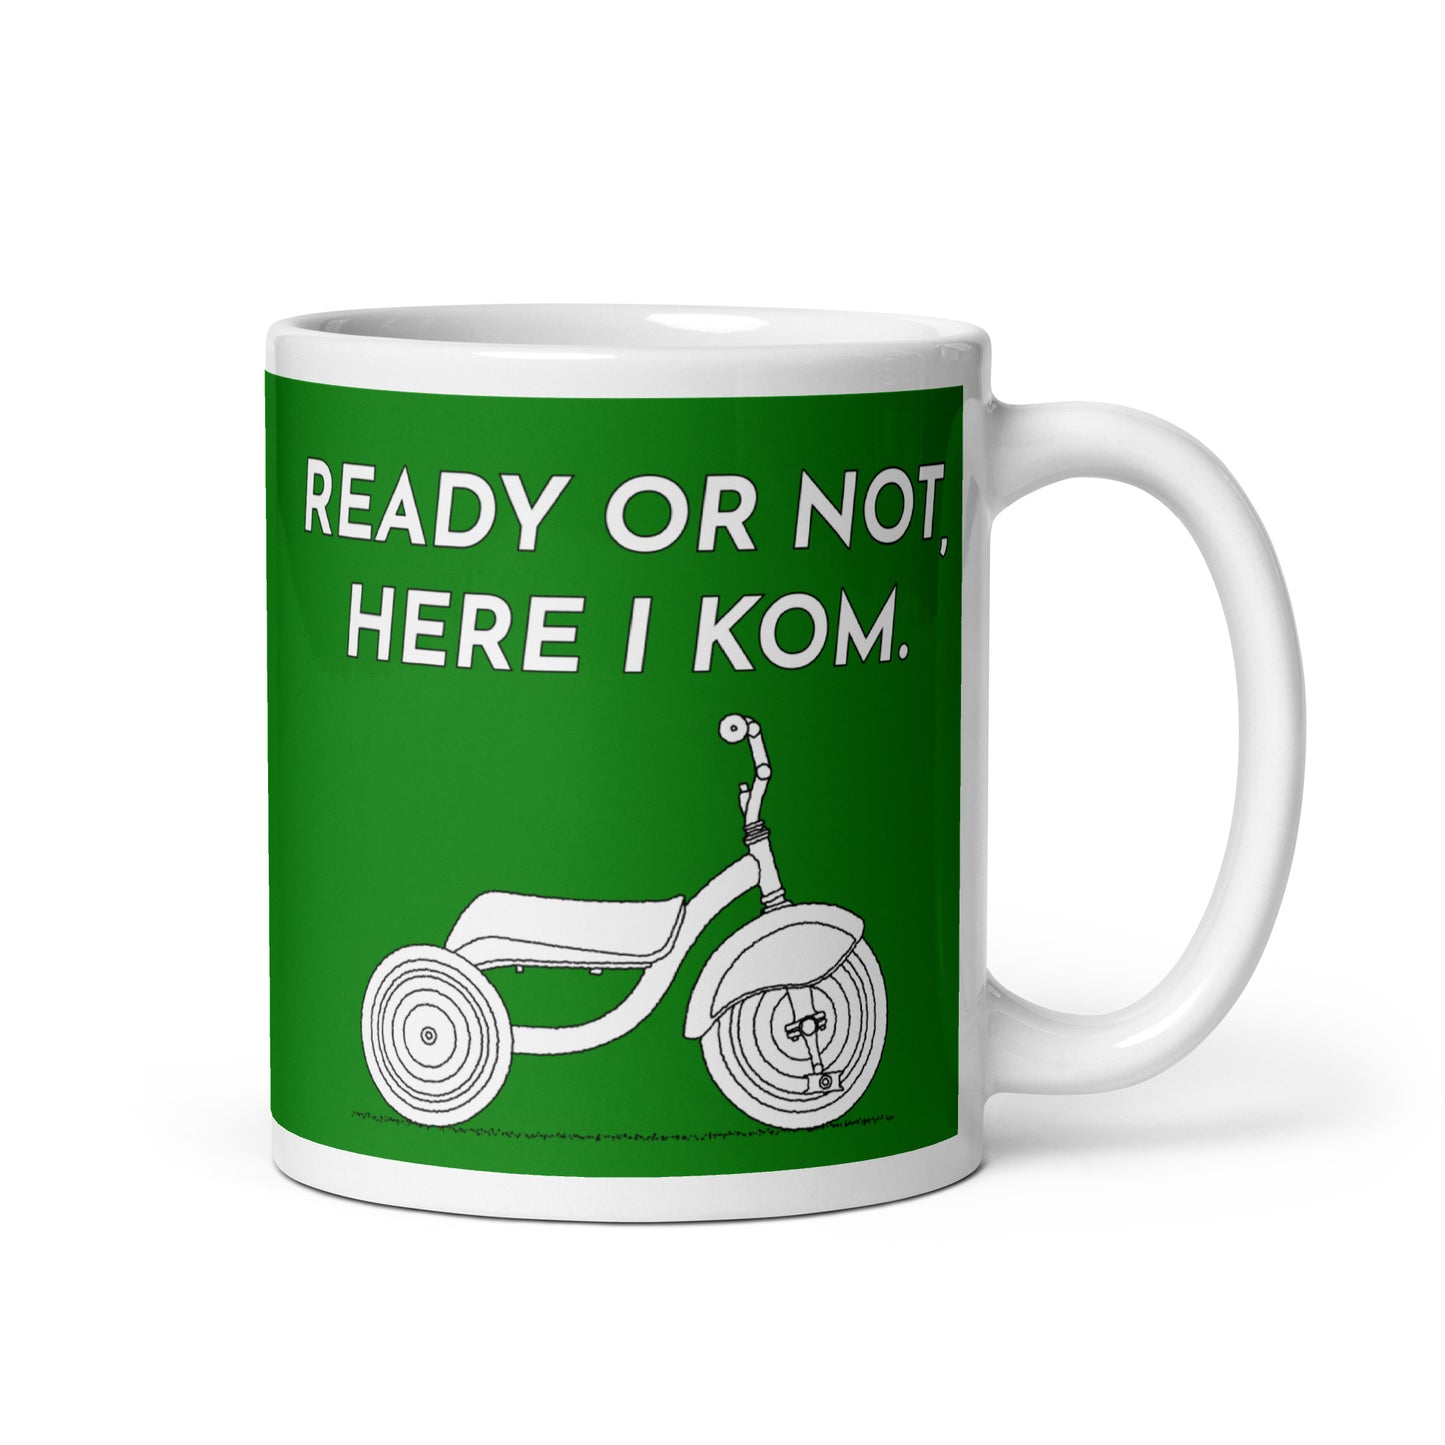 Ready Or Not, Here I KOM, Green Tricycle Mug M075